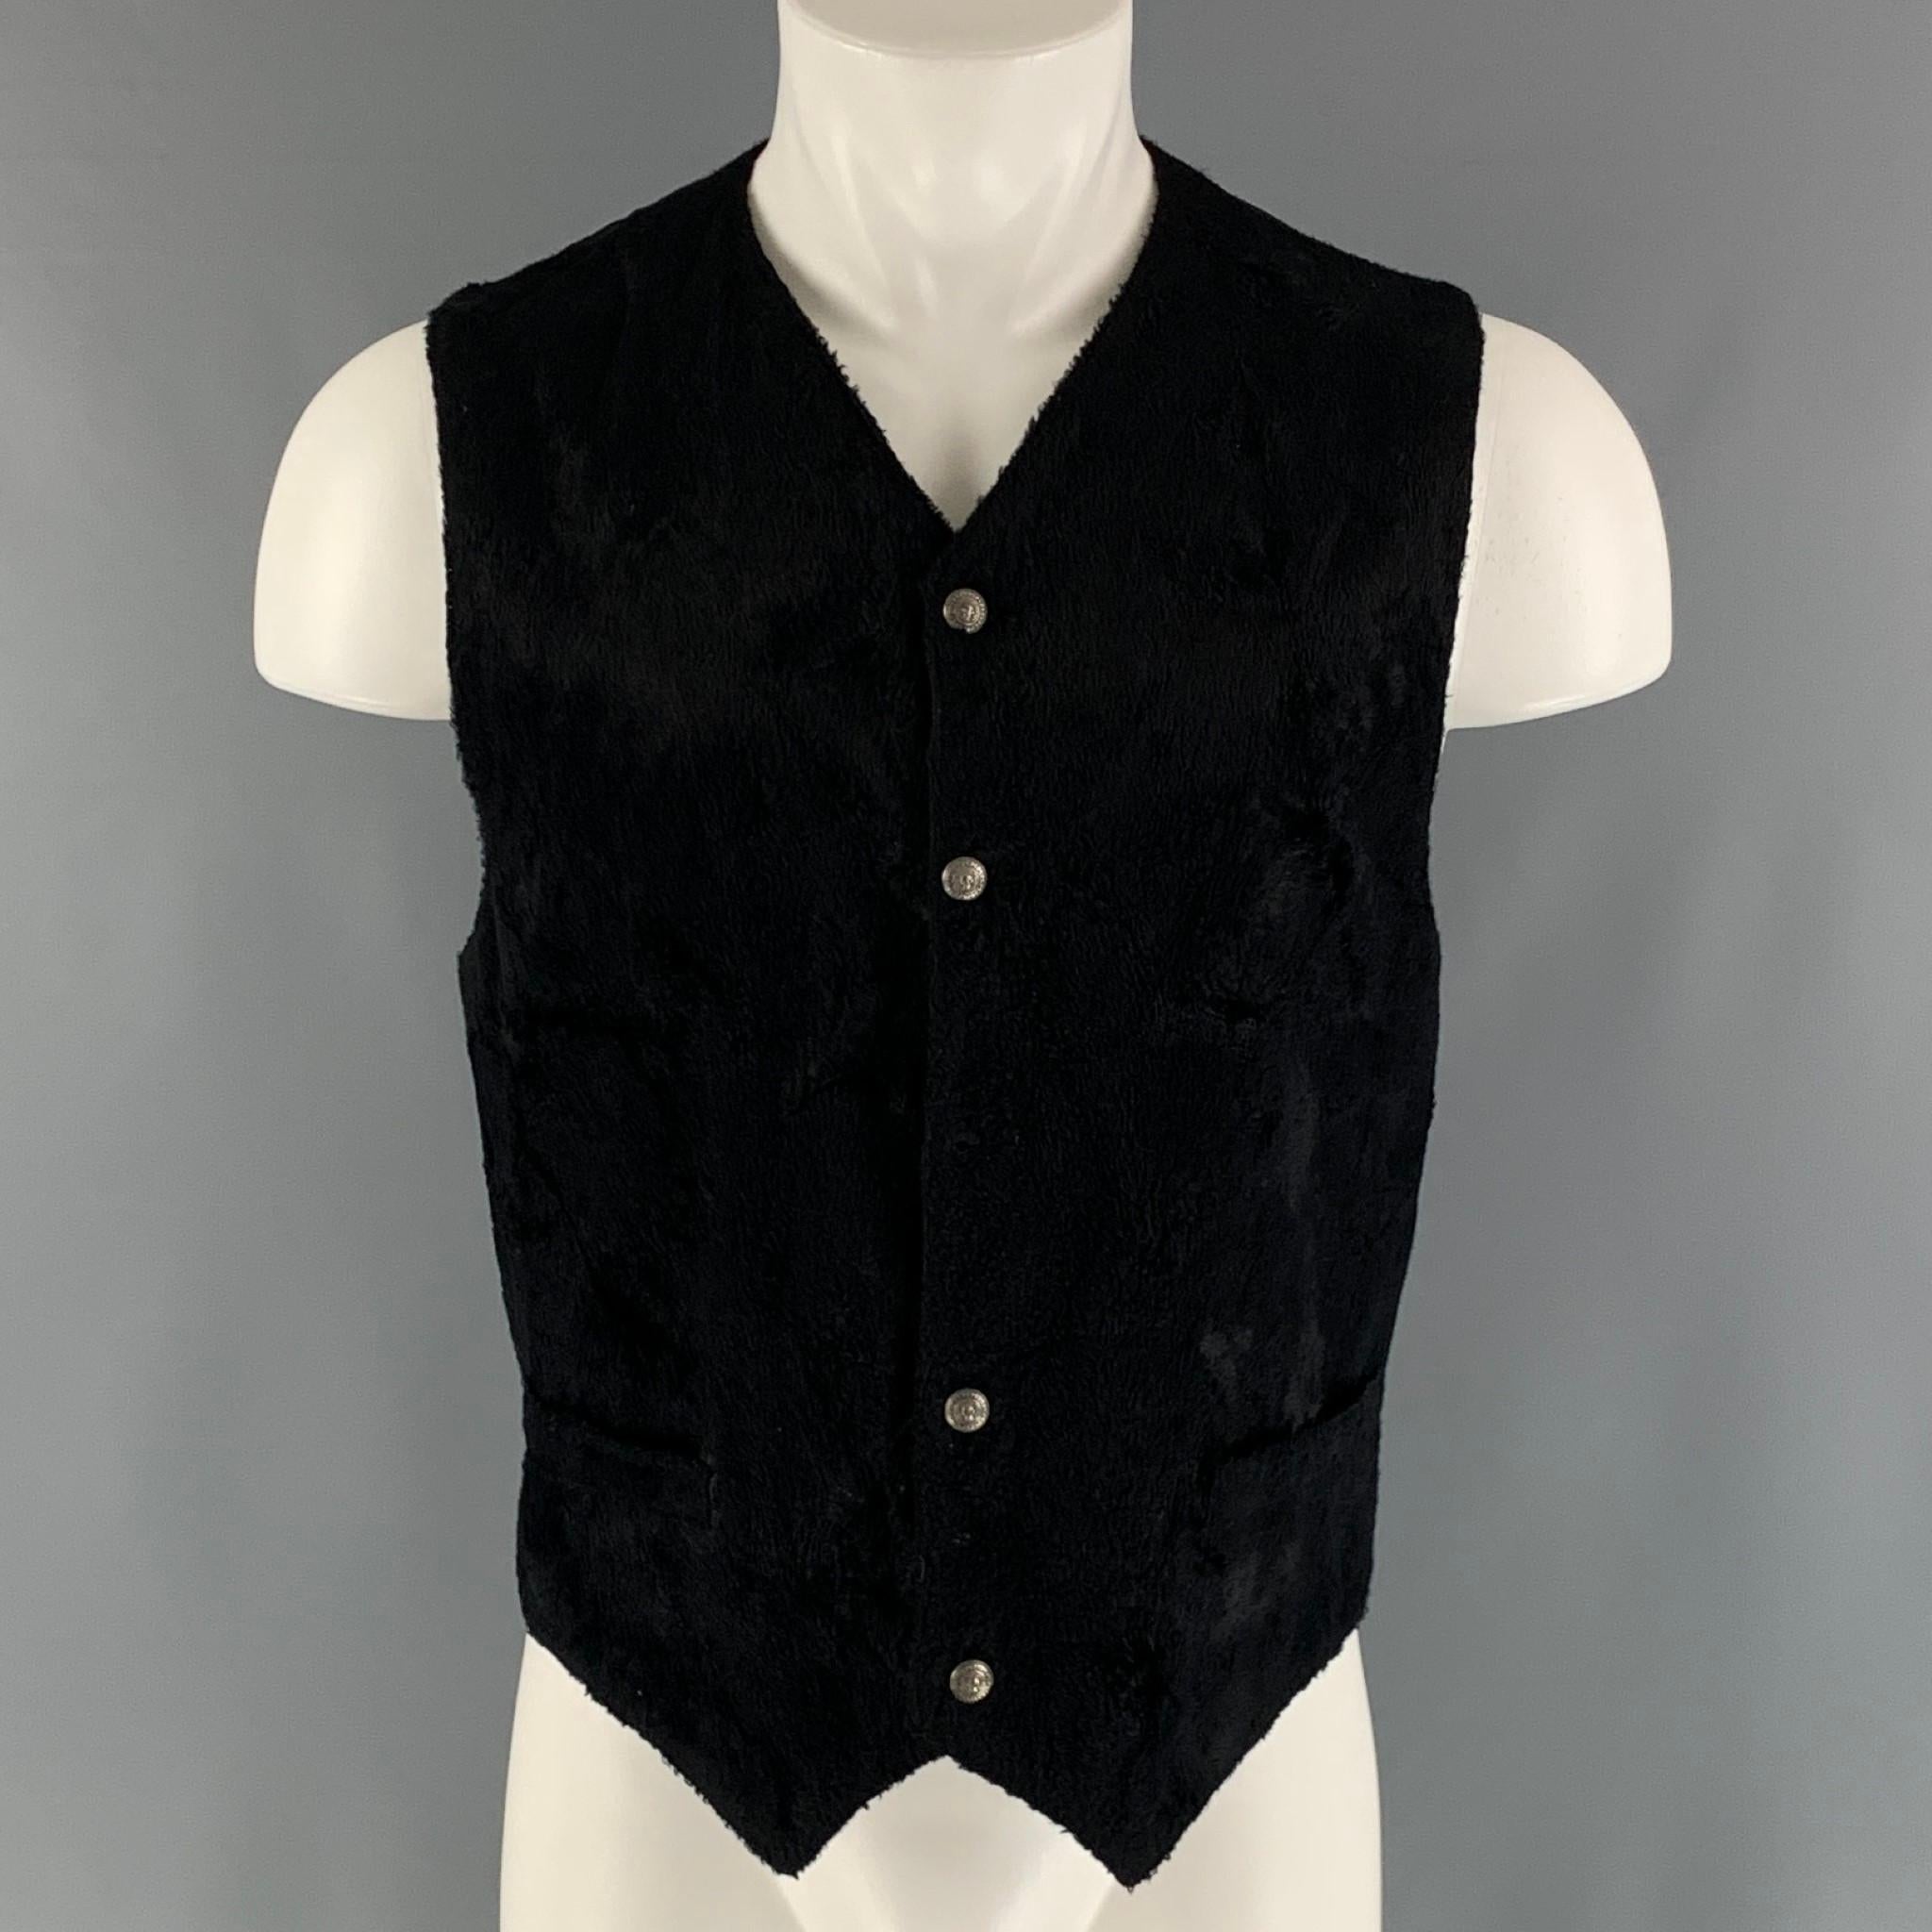 VERSACE by GIANNI VERSACE vest comes in a black cotton and viscose woven material featuring a plush texture, front pockets, back belt, black medusa buttons, and a buttoned closure. Made in Italy.

Very Good Pre-Owned Condition. Missing